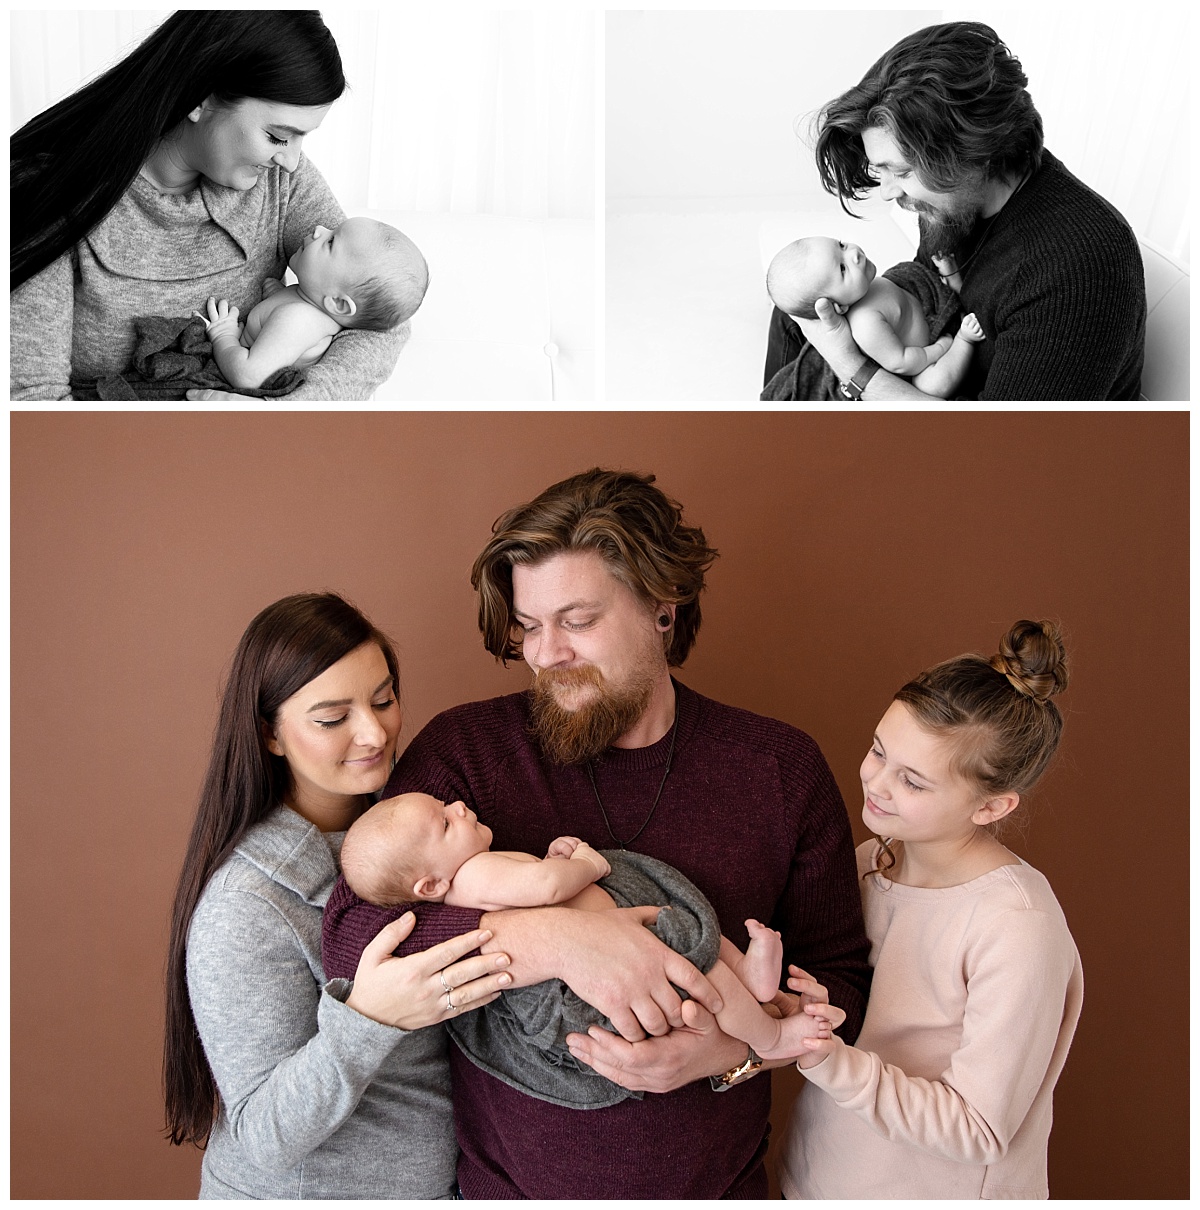 st-louis-newborn-photographer-baby-boy-with family-on-brown-backdrop-collaged-with-mom-and-dad-with-newborn.jpg